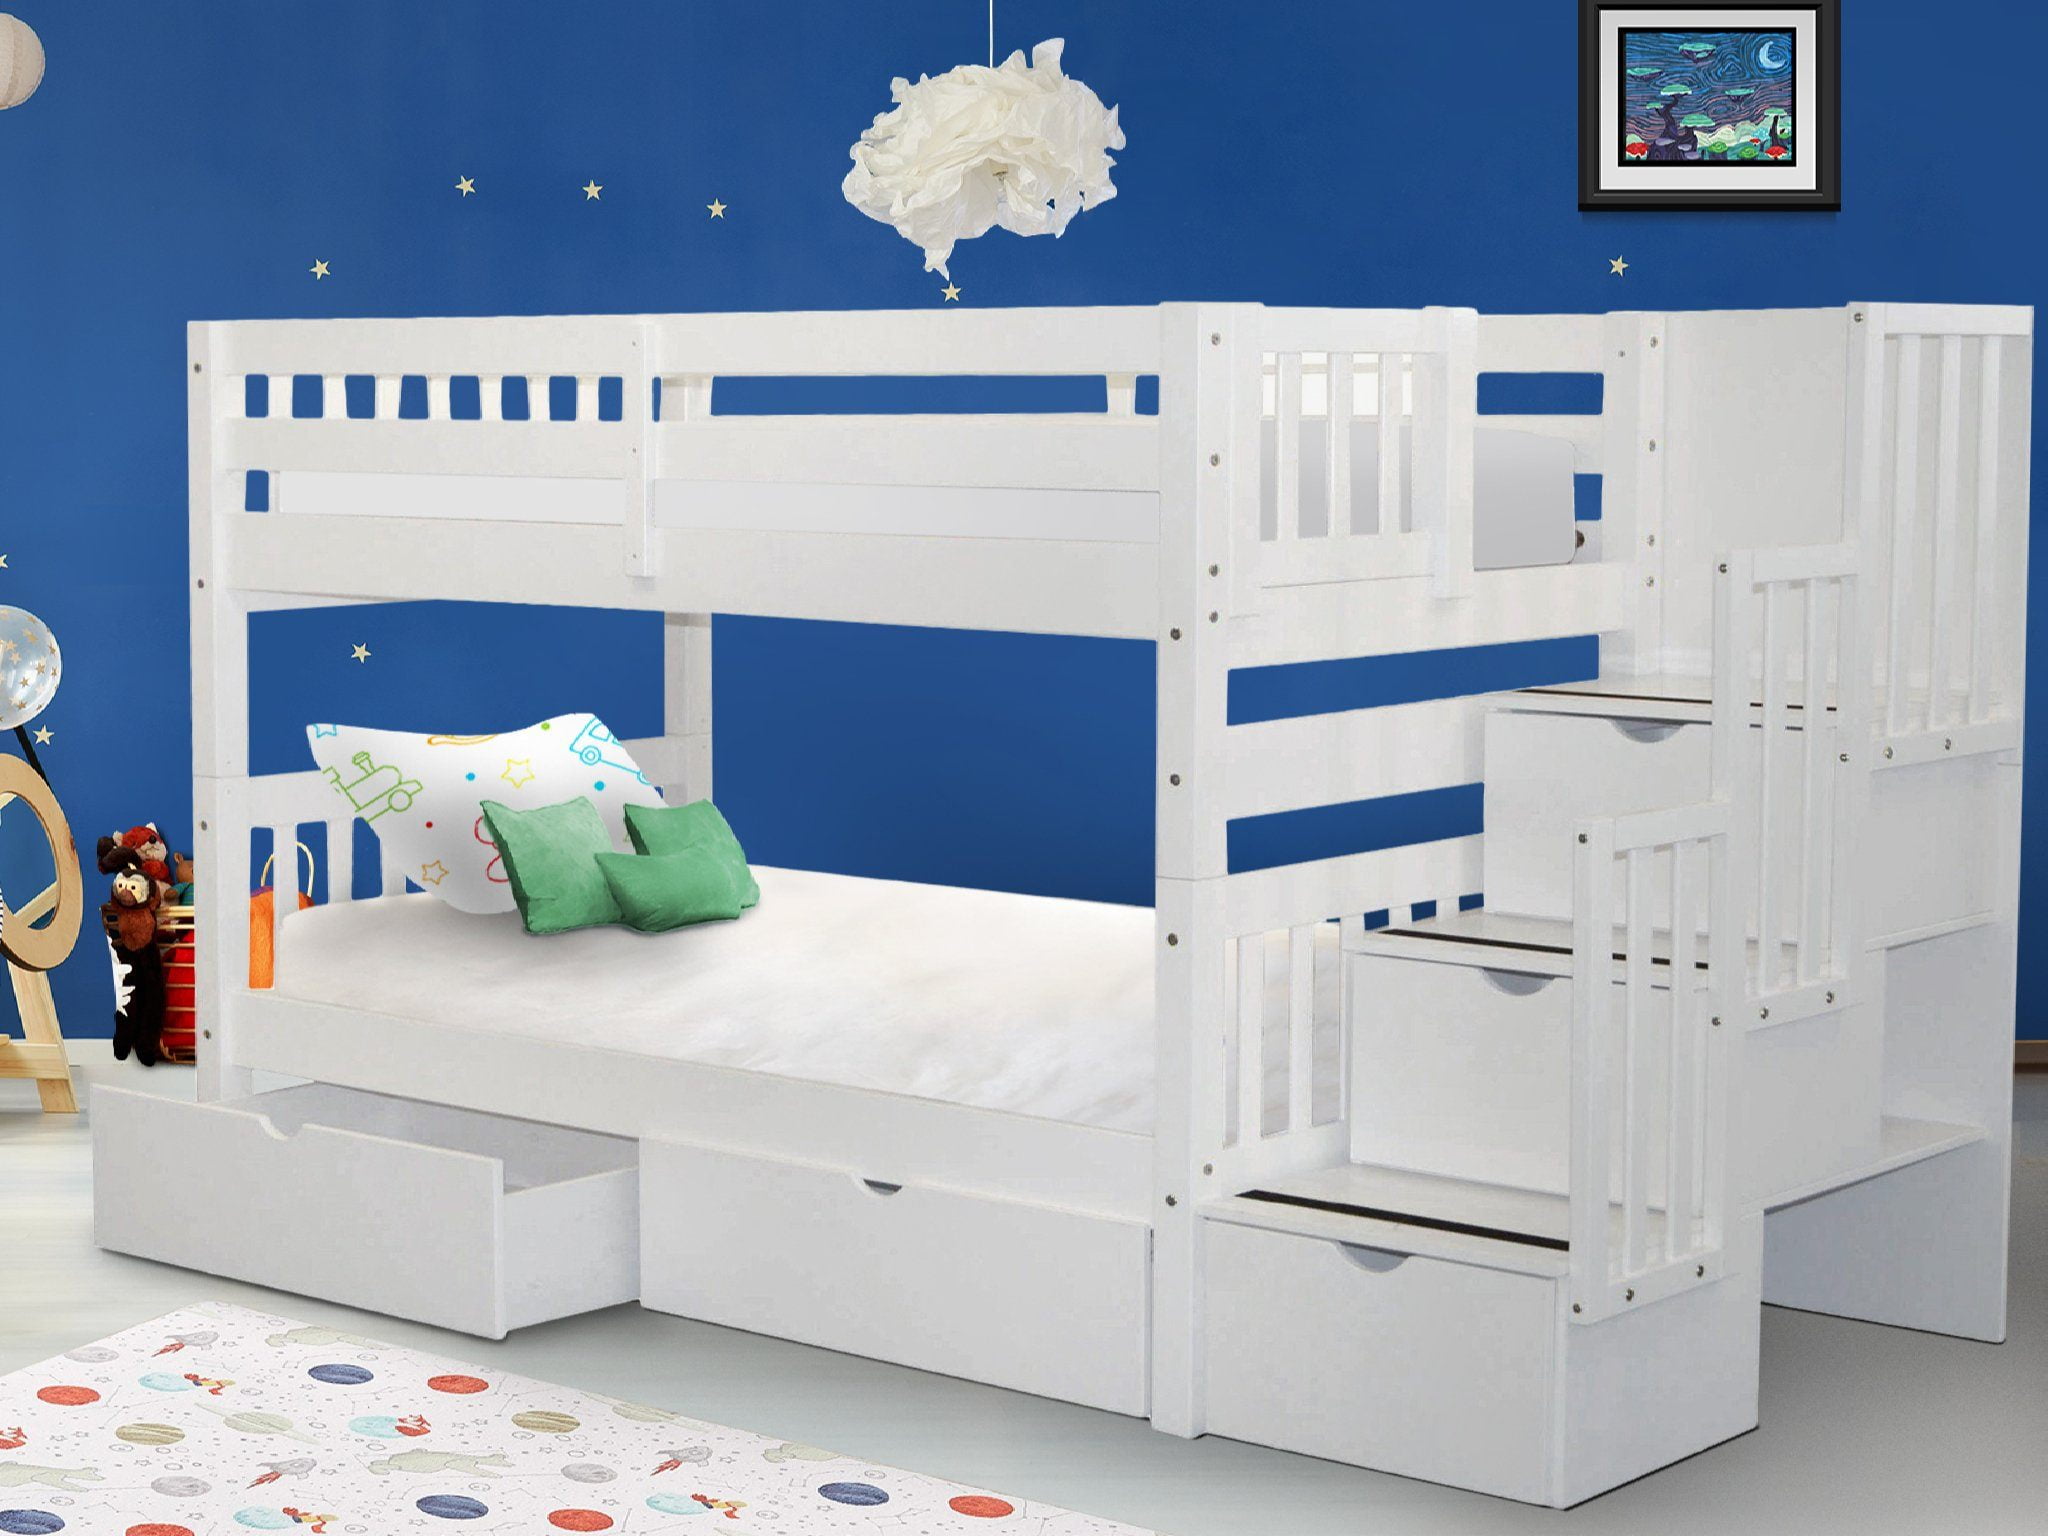 Bedz King Stairway Bunk Beds Twin Over, Bunk Bed With Drawers